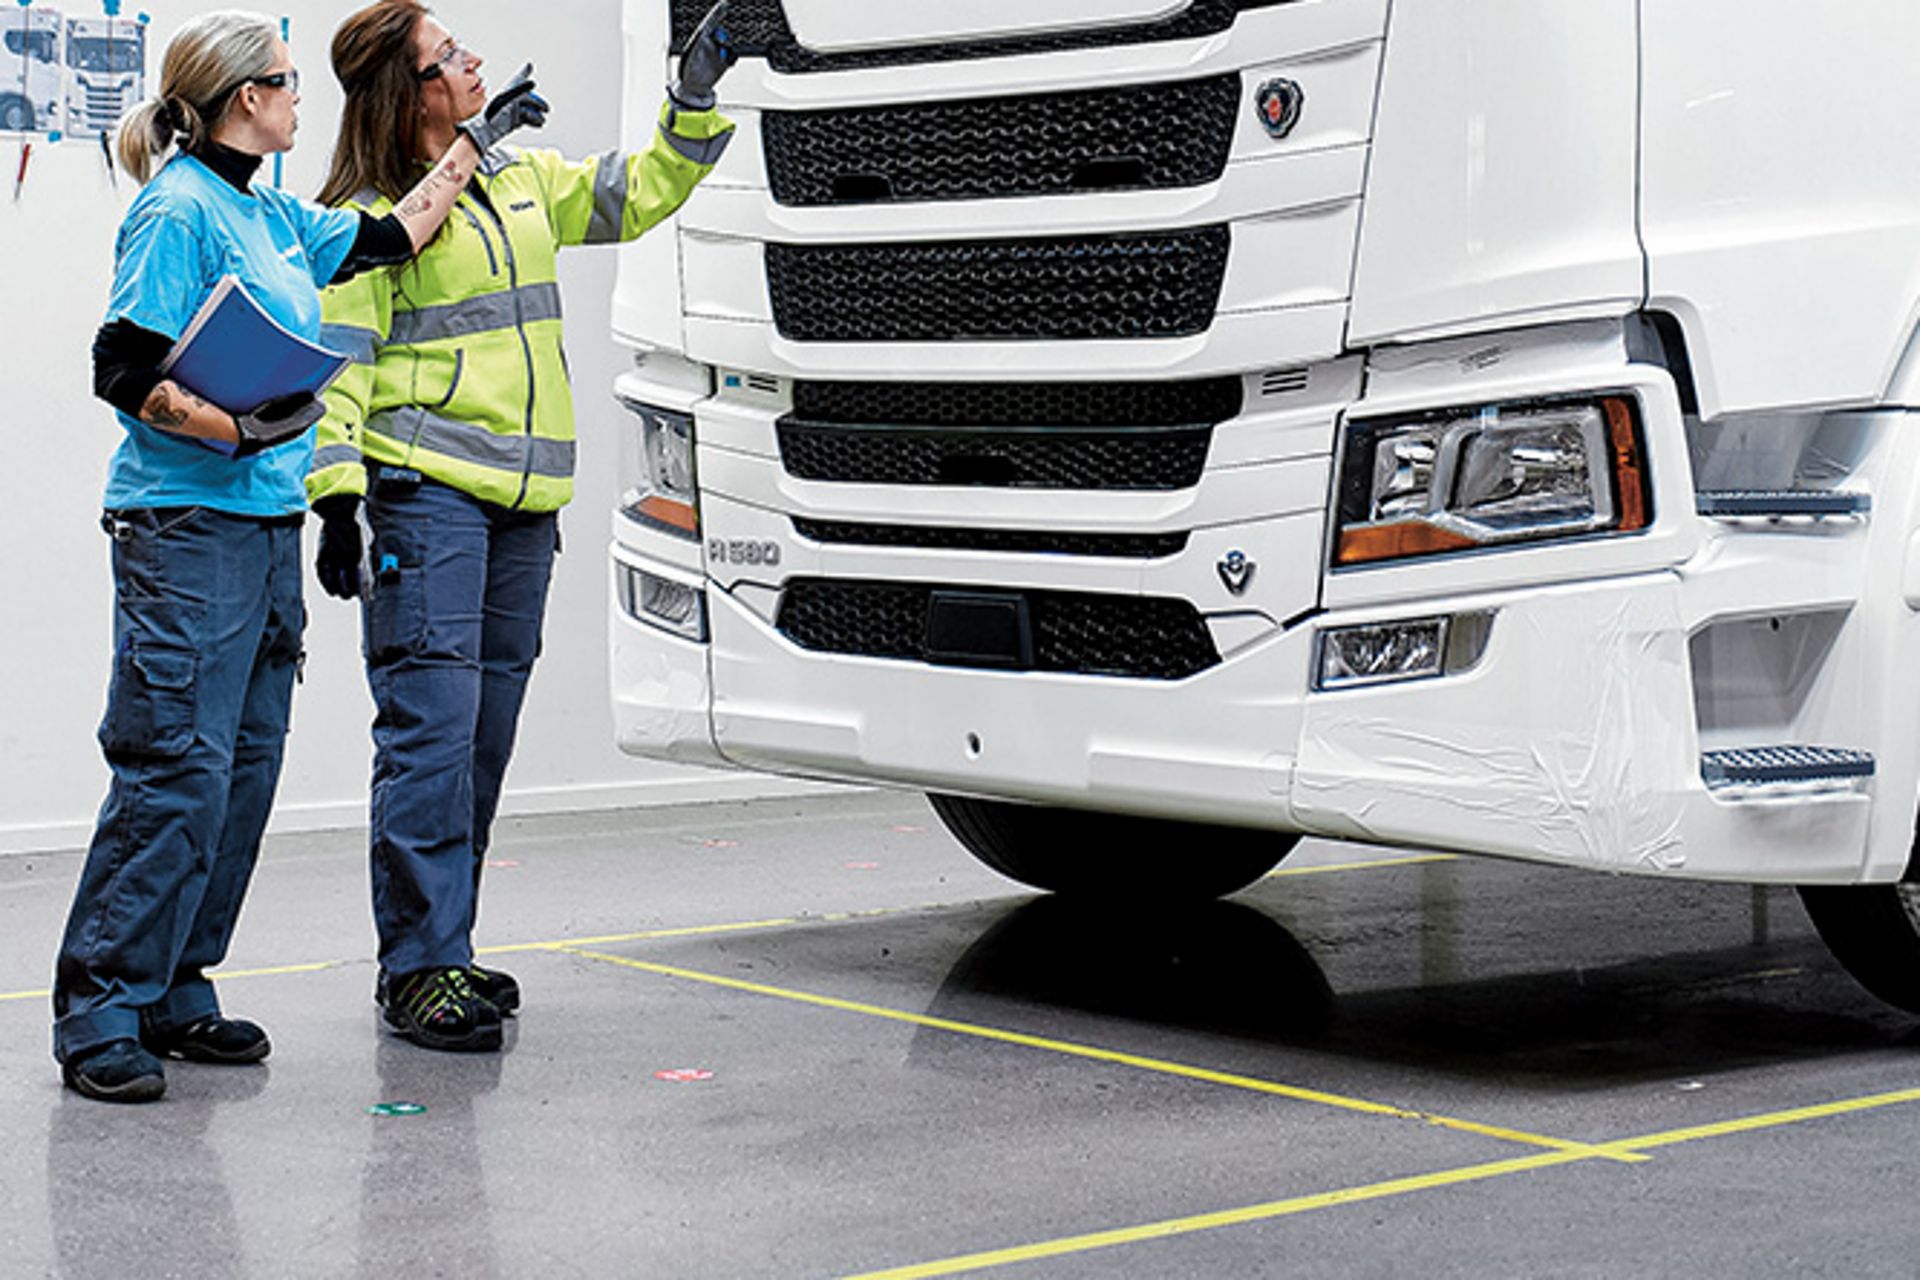 Using Scania’s “Byggladan principle”, a custom-fit vehicle can be built for every intended vehicle use, regardless of the number of units.
                 